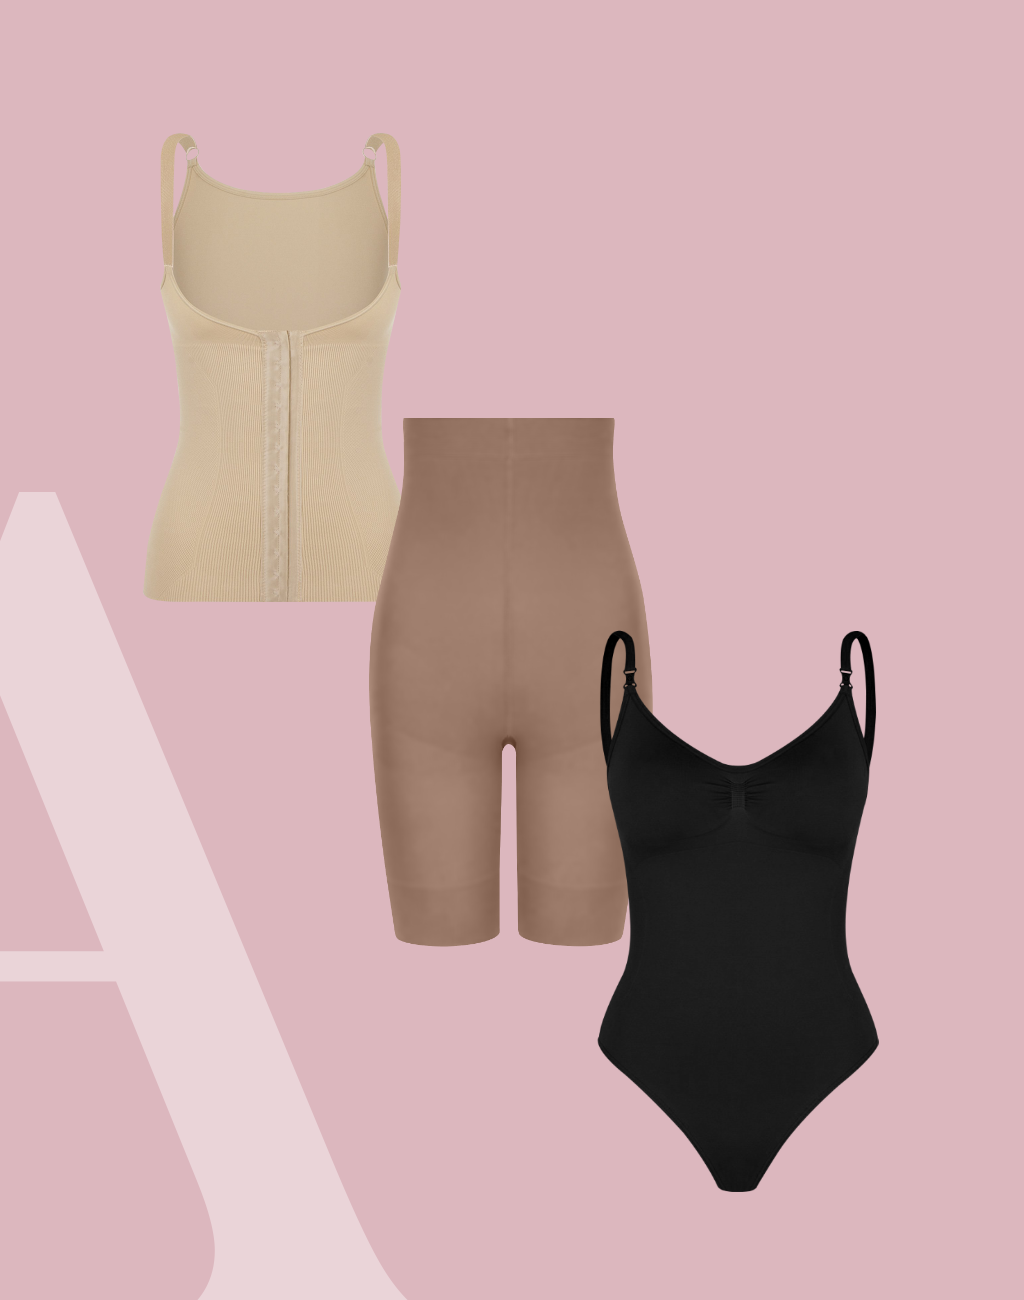 What is shapewear and what are its benefits? - LOOLA